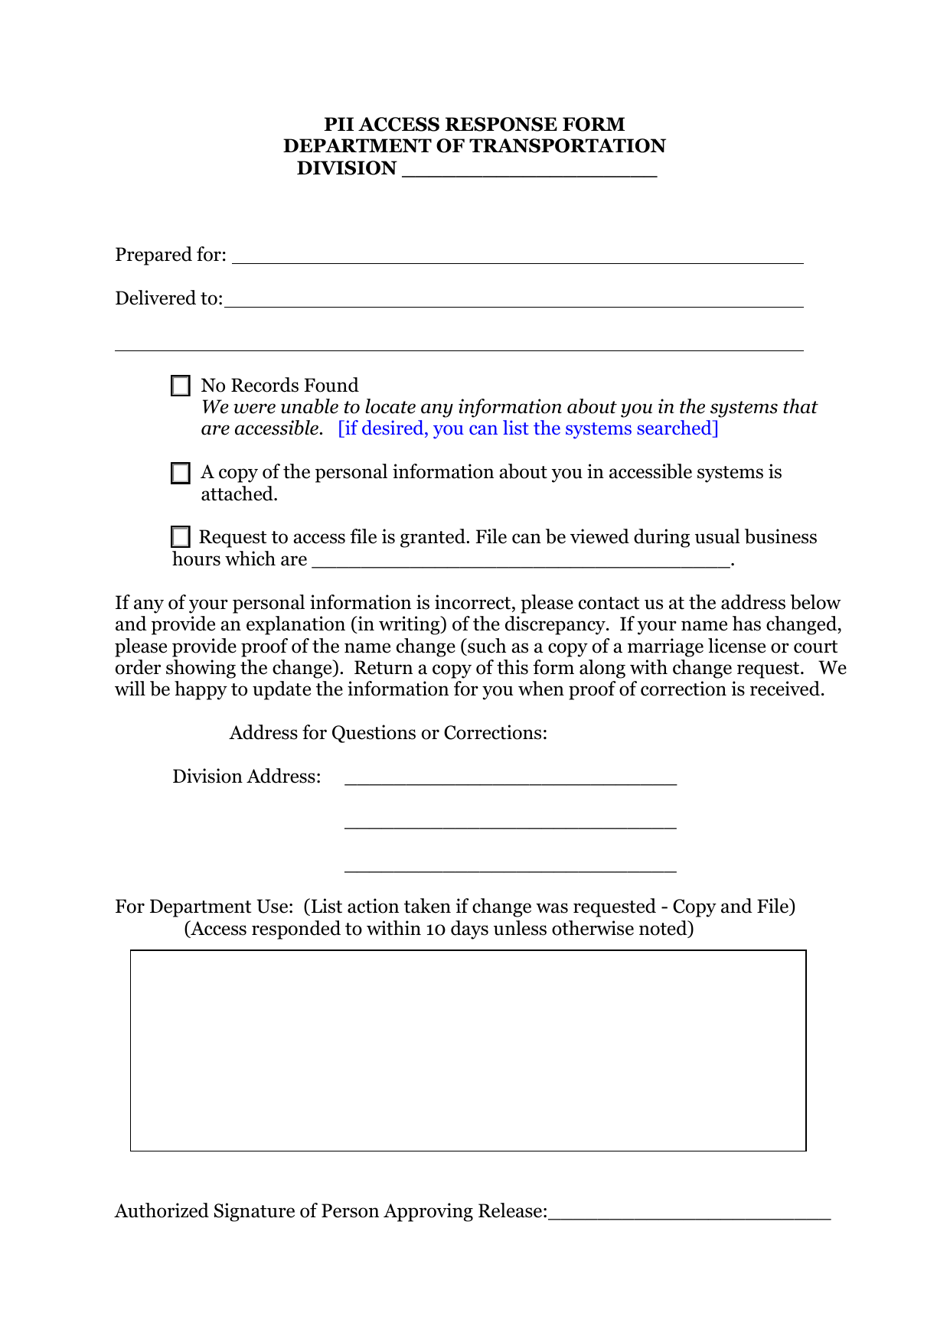 Pii Access Response Form - West Virginia, Page 1